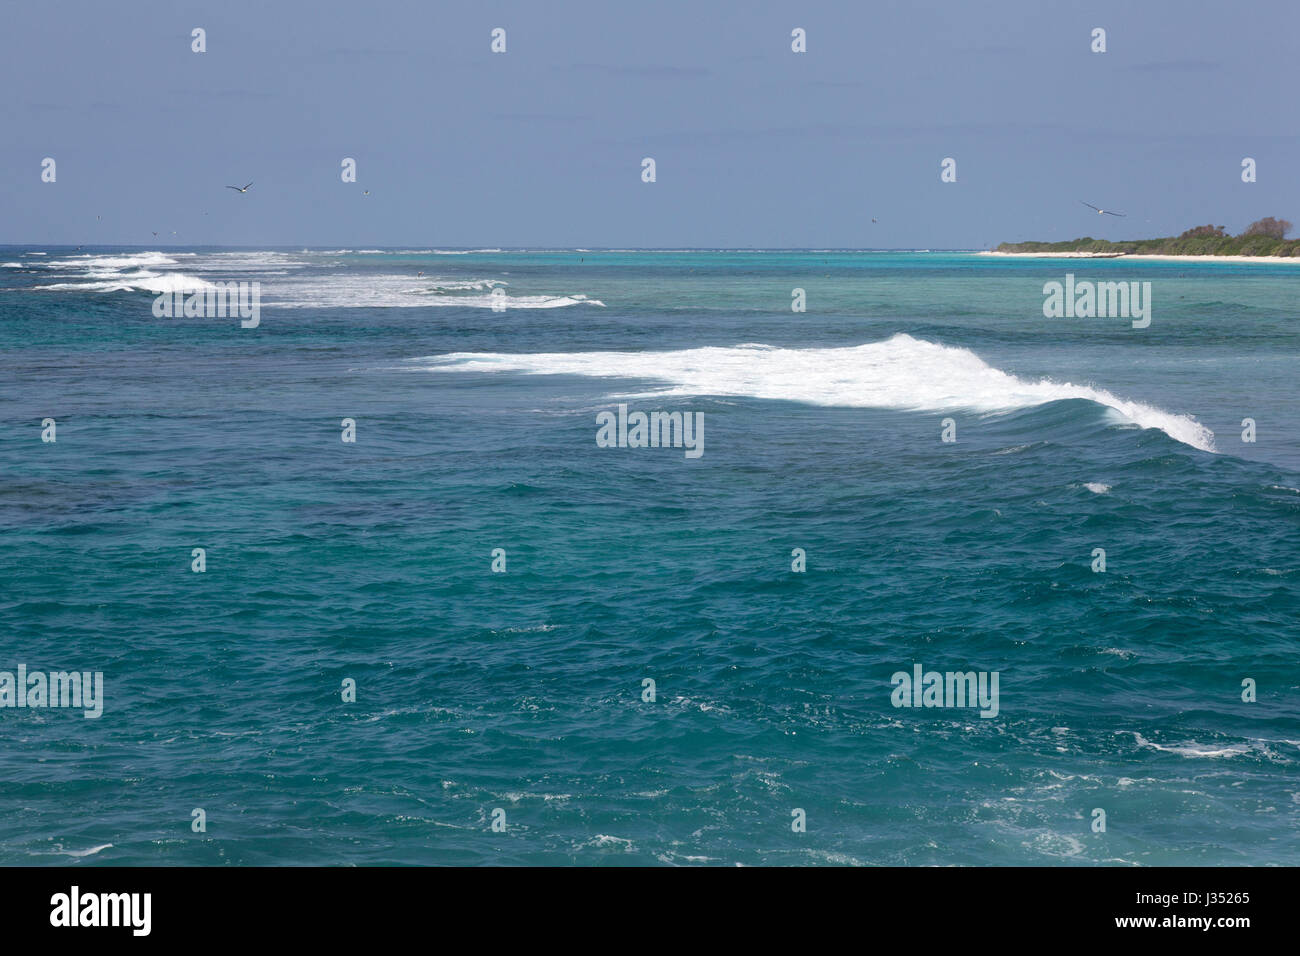 Surf breaking over the barrier reef surrounding Midway Atoll's island coast and lagoon in Papahanaumokuakea Marine National Monument Stock Photo